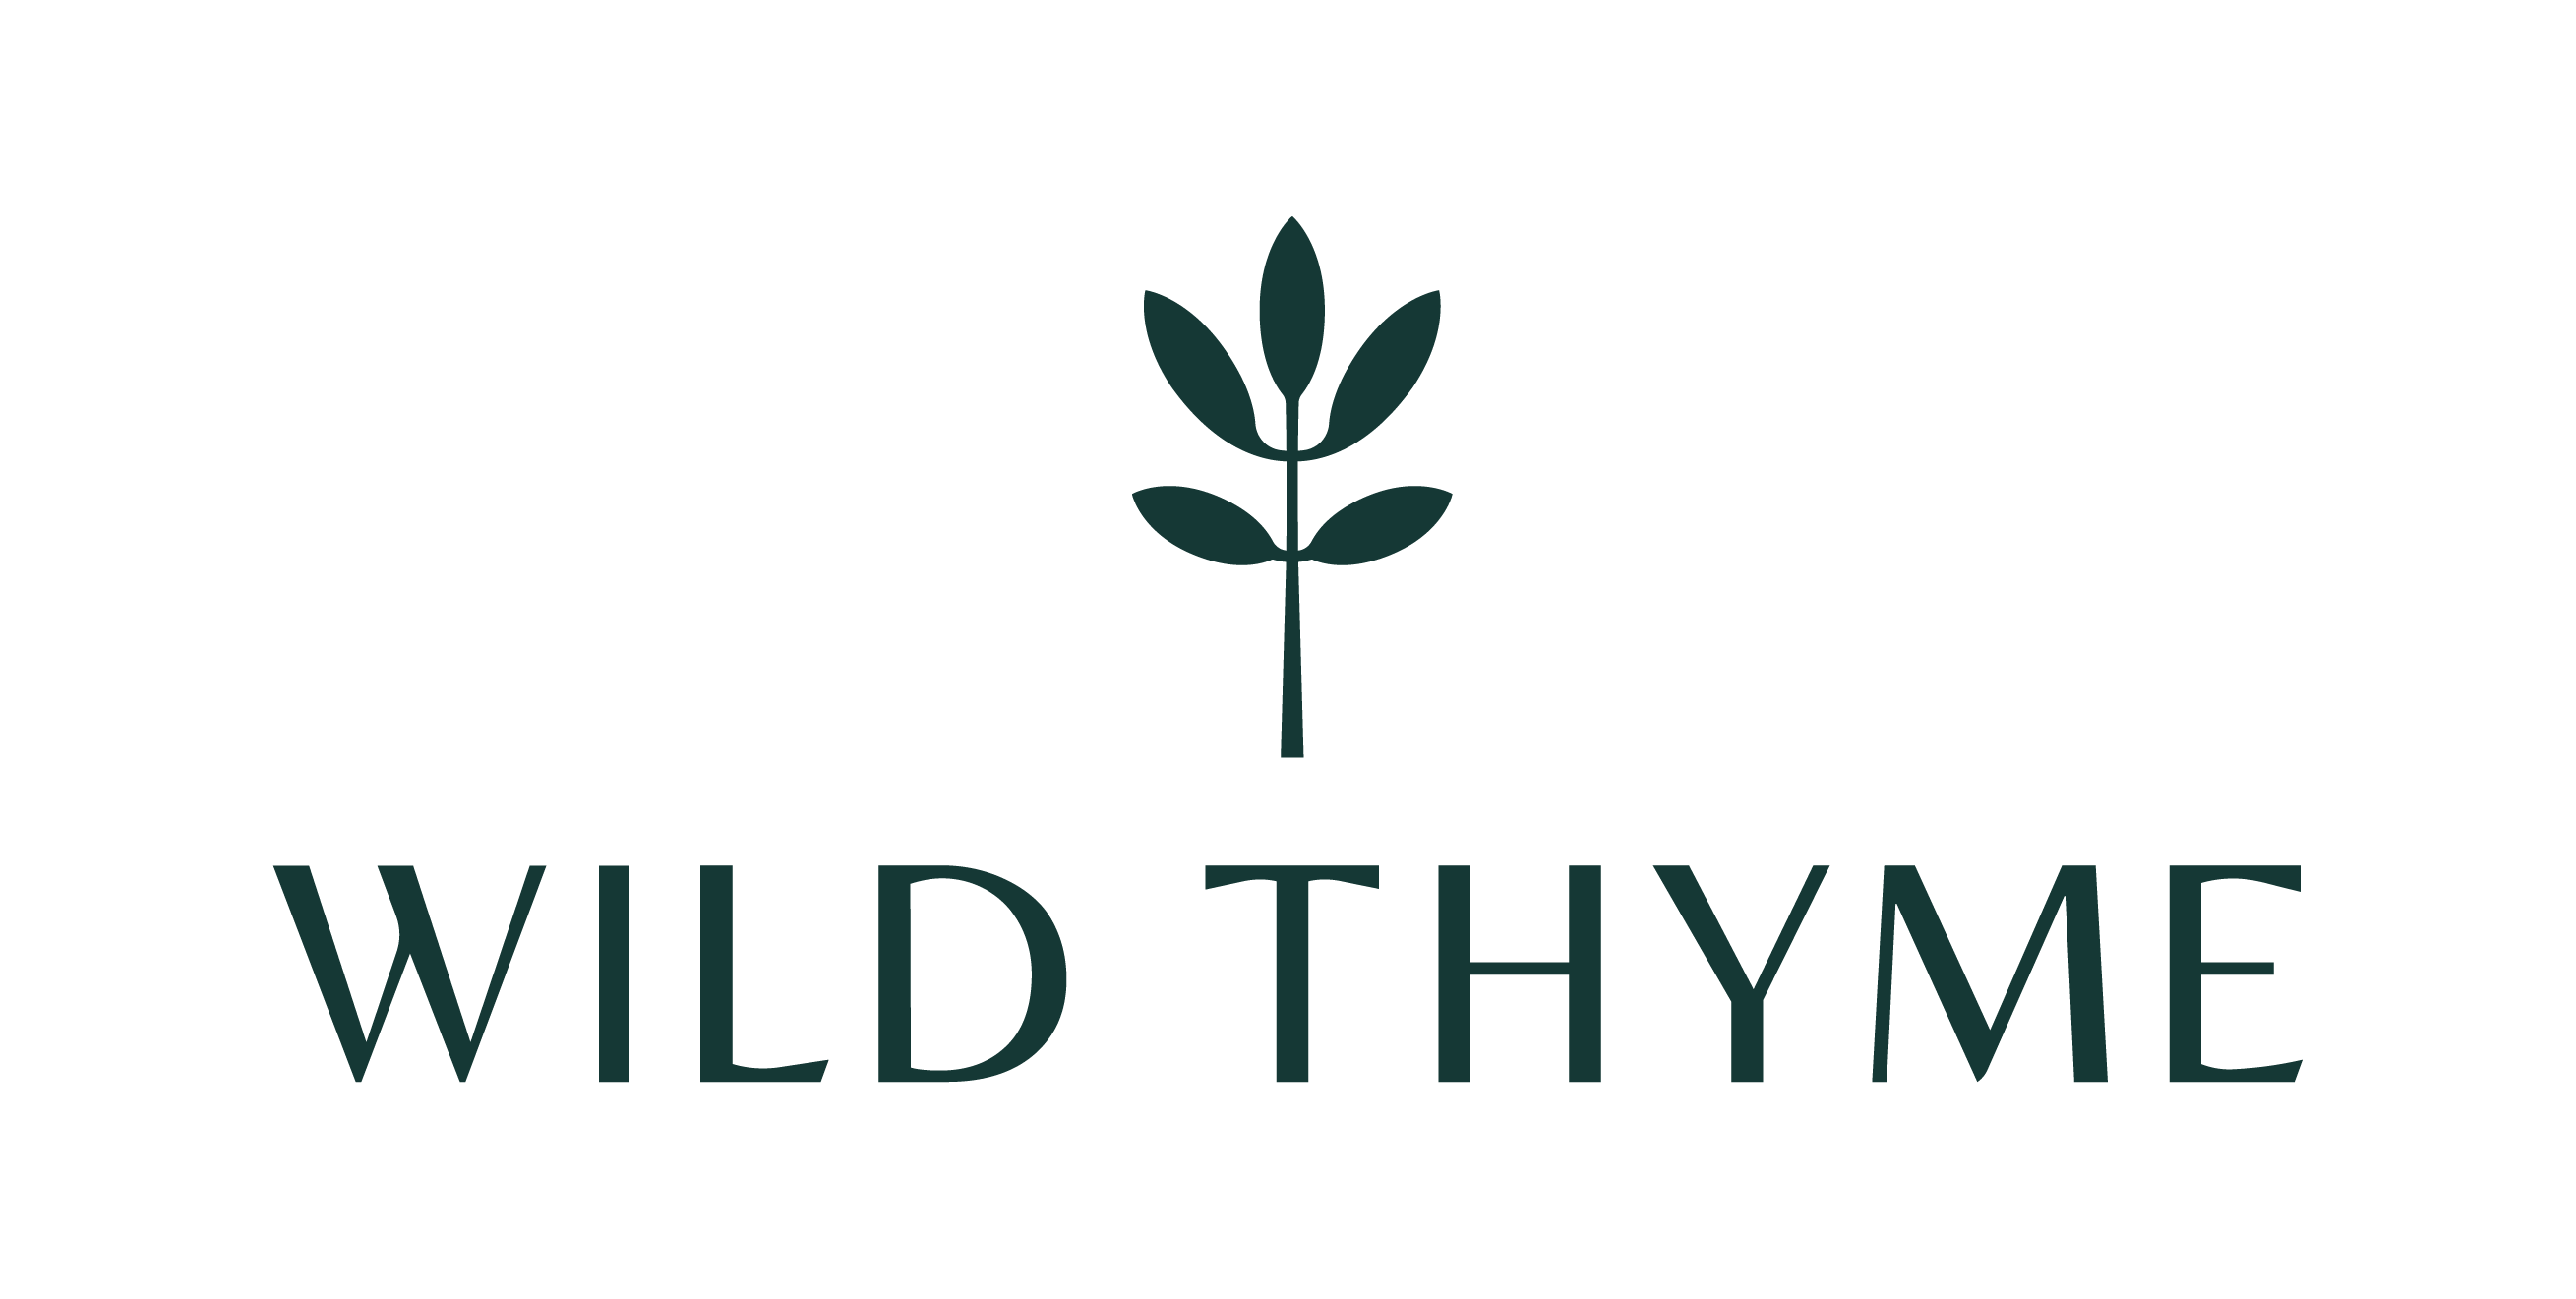 Wildthyme